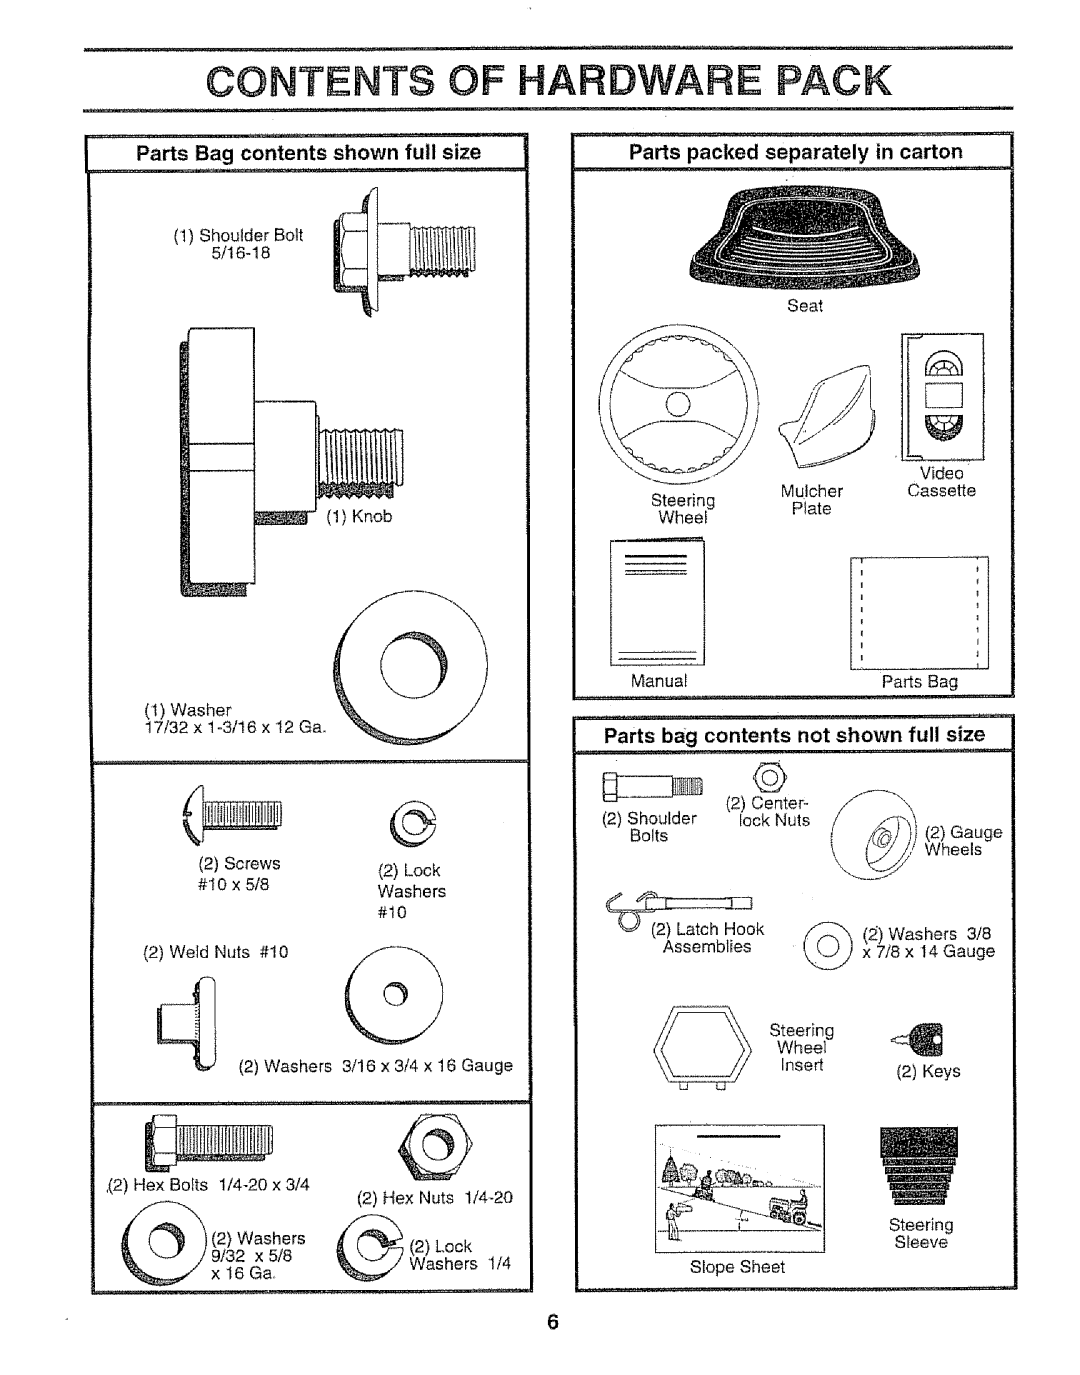 Craftsman 917.259592 Contents Of Hardware Pack, Parts Bag contents shown full size, Parts packed separately in carton 